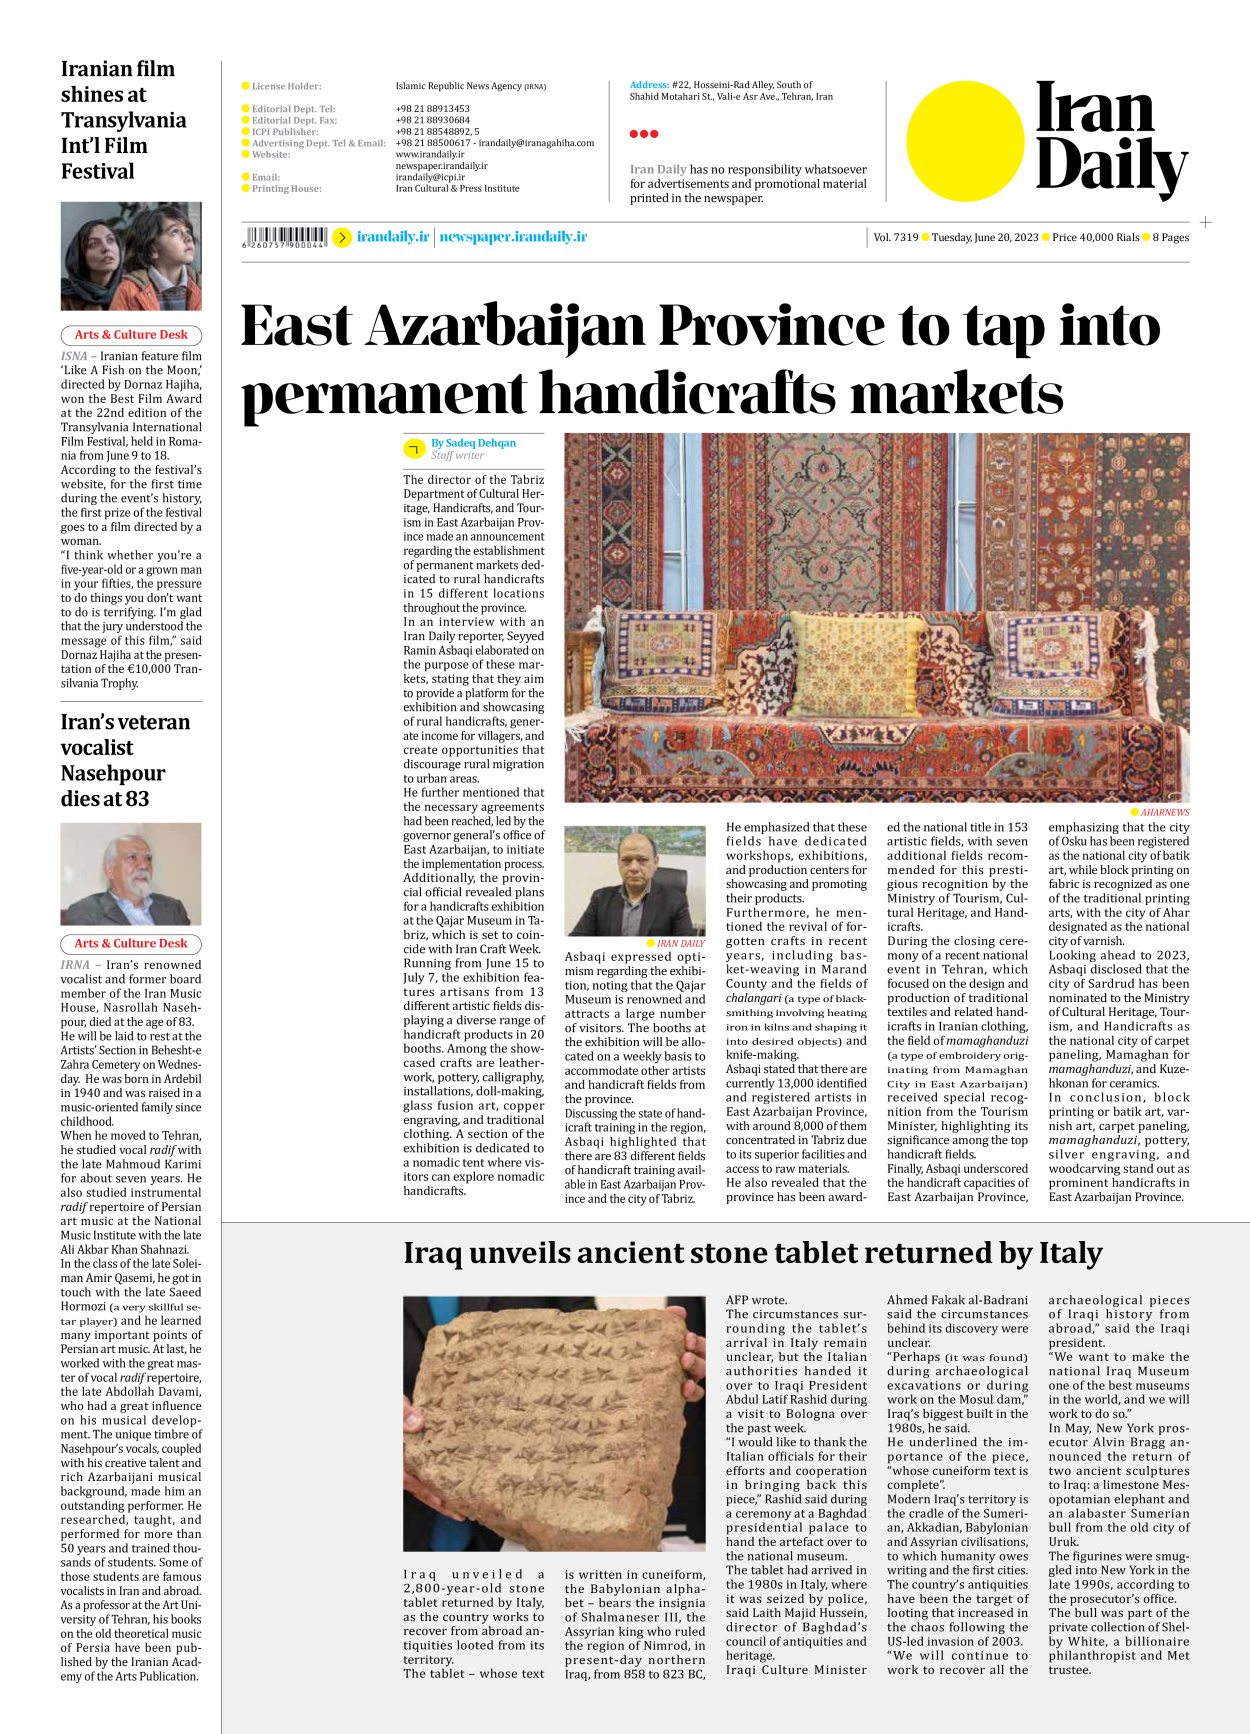 Iran Daily - Number Seven Thousand Three Hundred and Nineteen - 20 June 2023 - Page 8